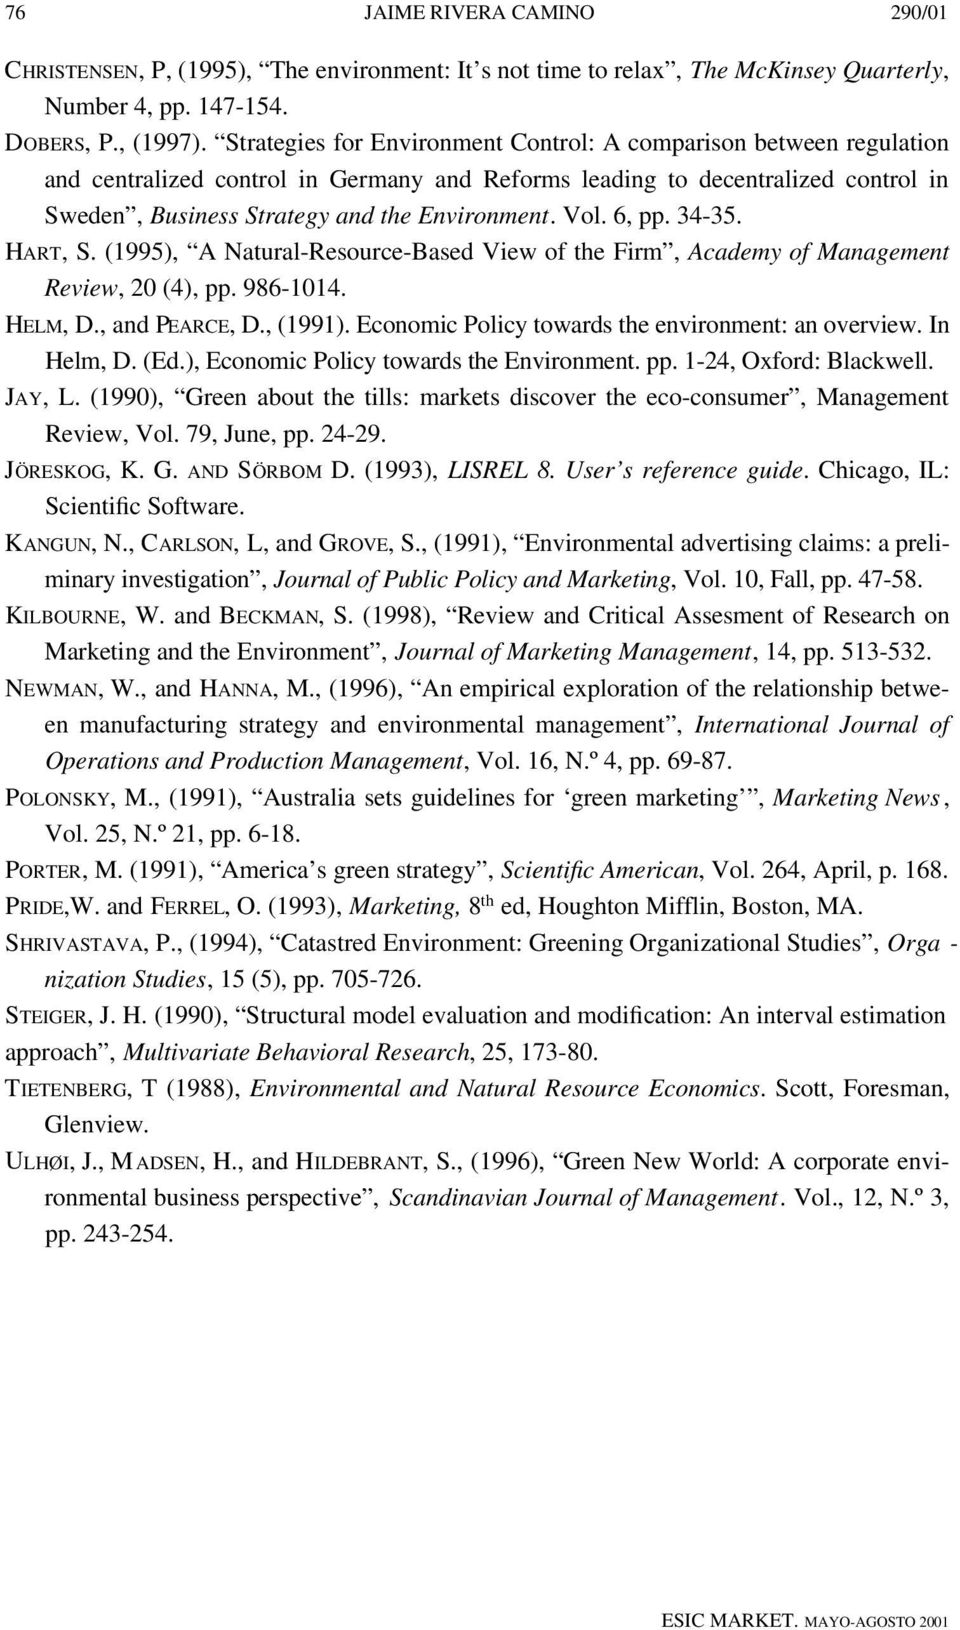 Vol. 6, pp. 34-35. HART, S. (1995), A Natural-Resource-Based View of the Firm, Academy of Management Review, 20 (4), pp. 986-1014. HE L M, D., and PE A R C E, D., (1991).